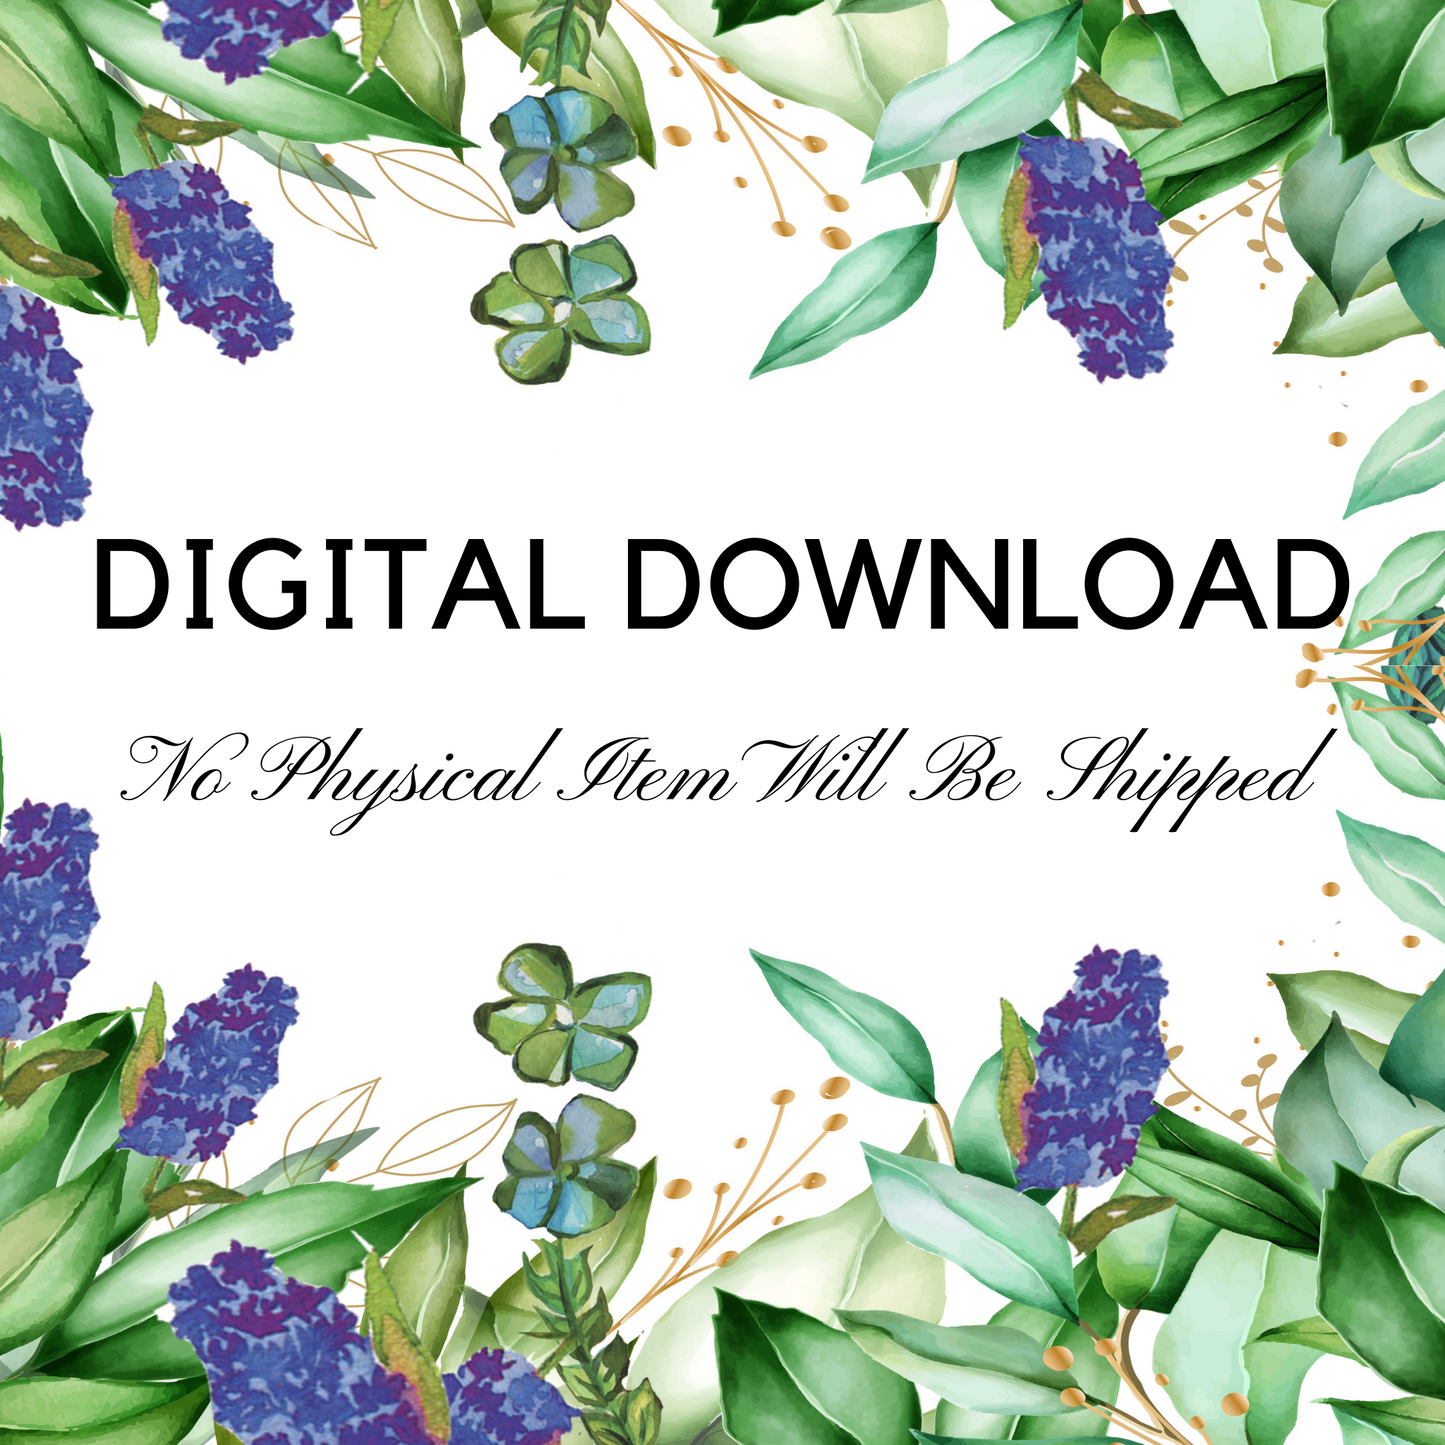 The announcement of the digital download by ArisaTeam